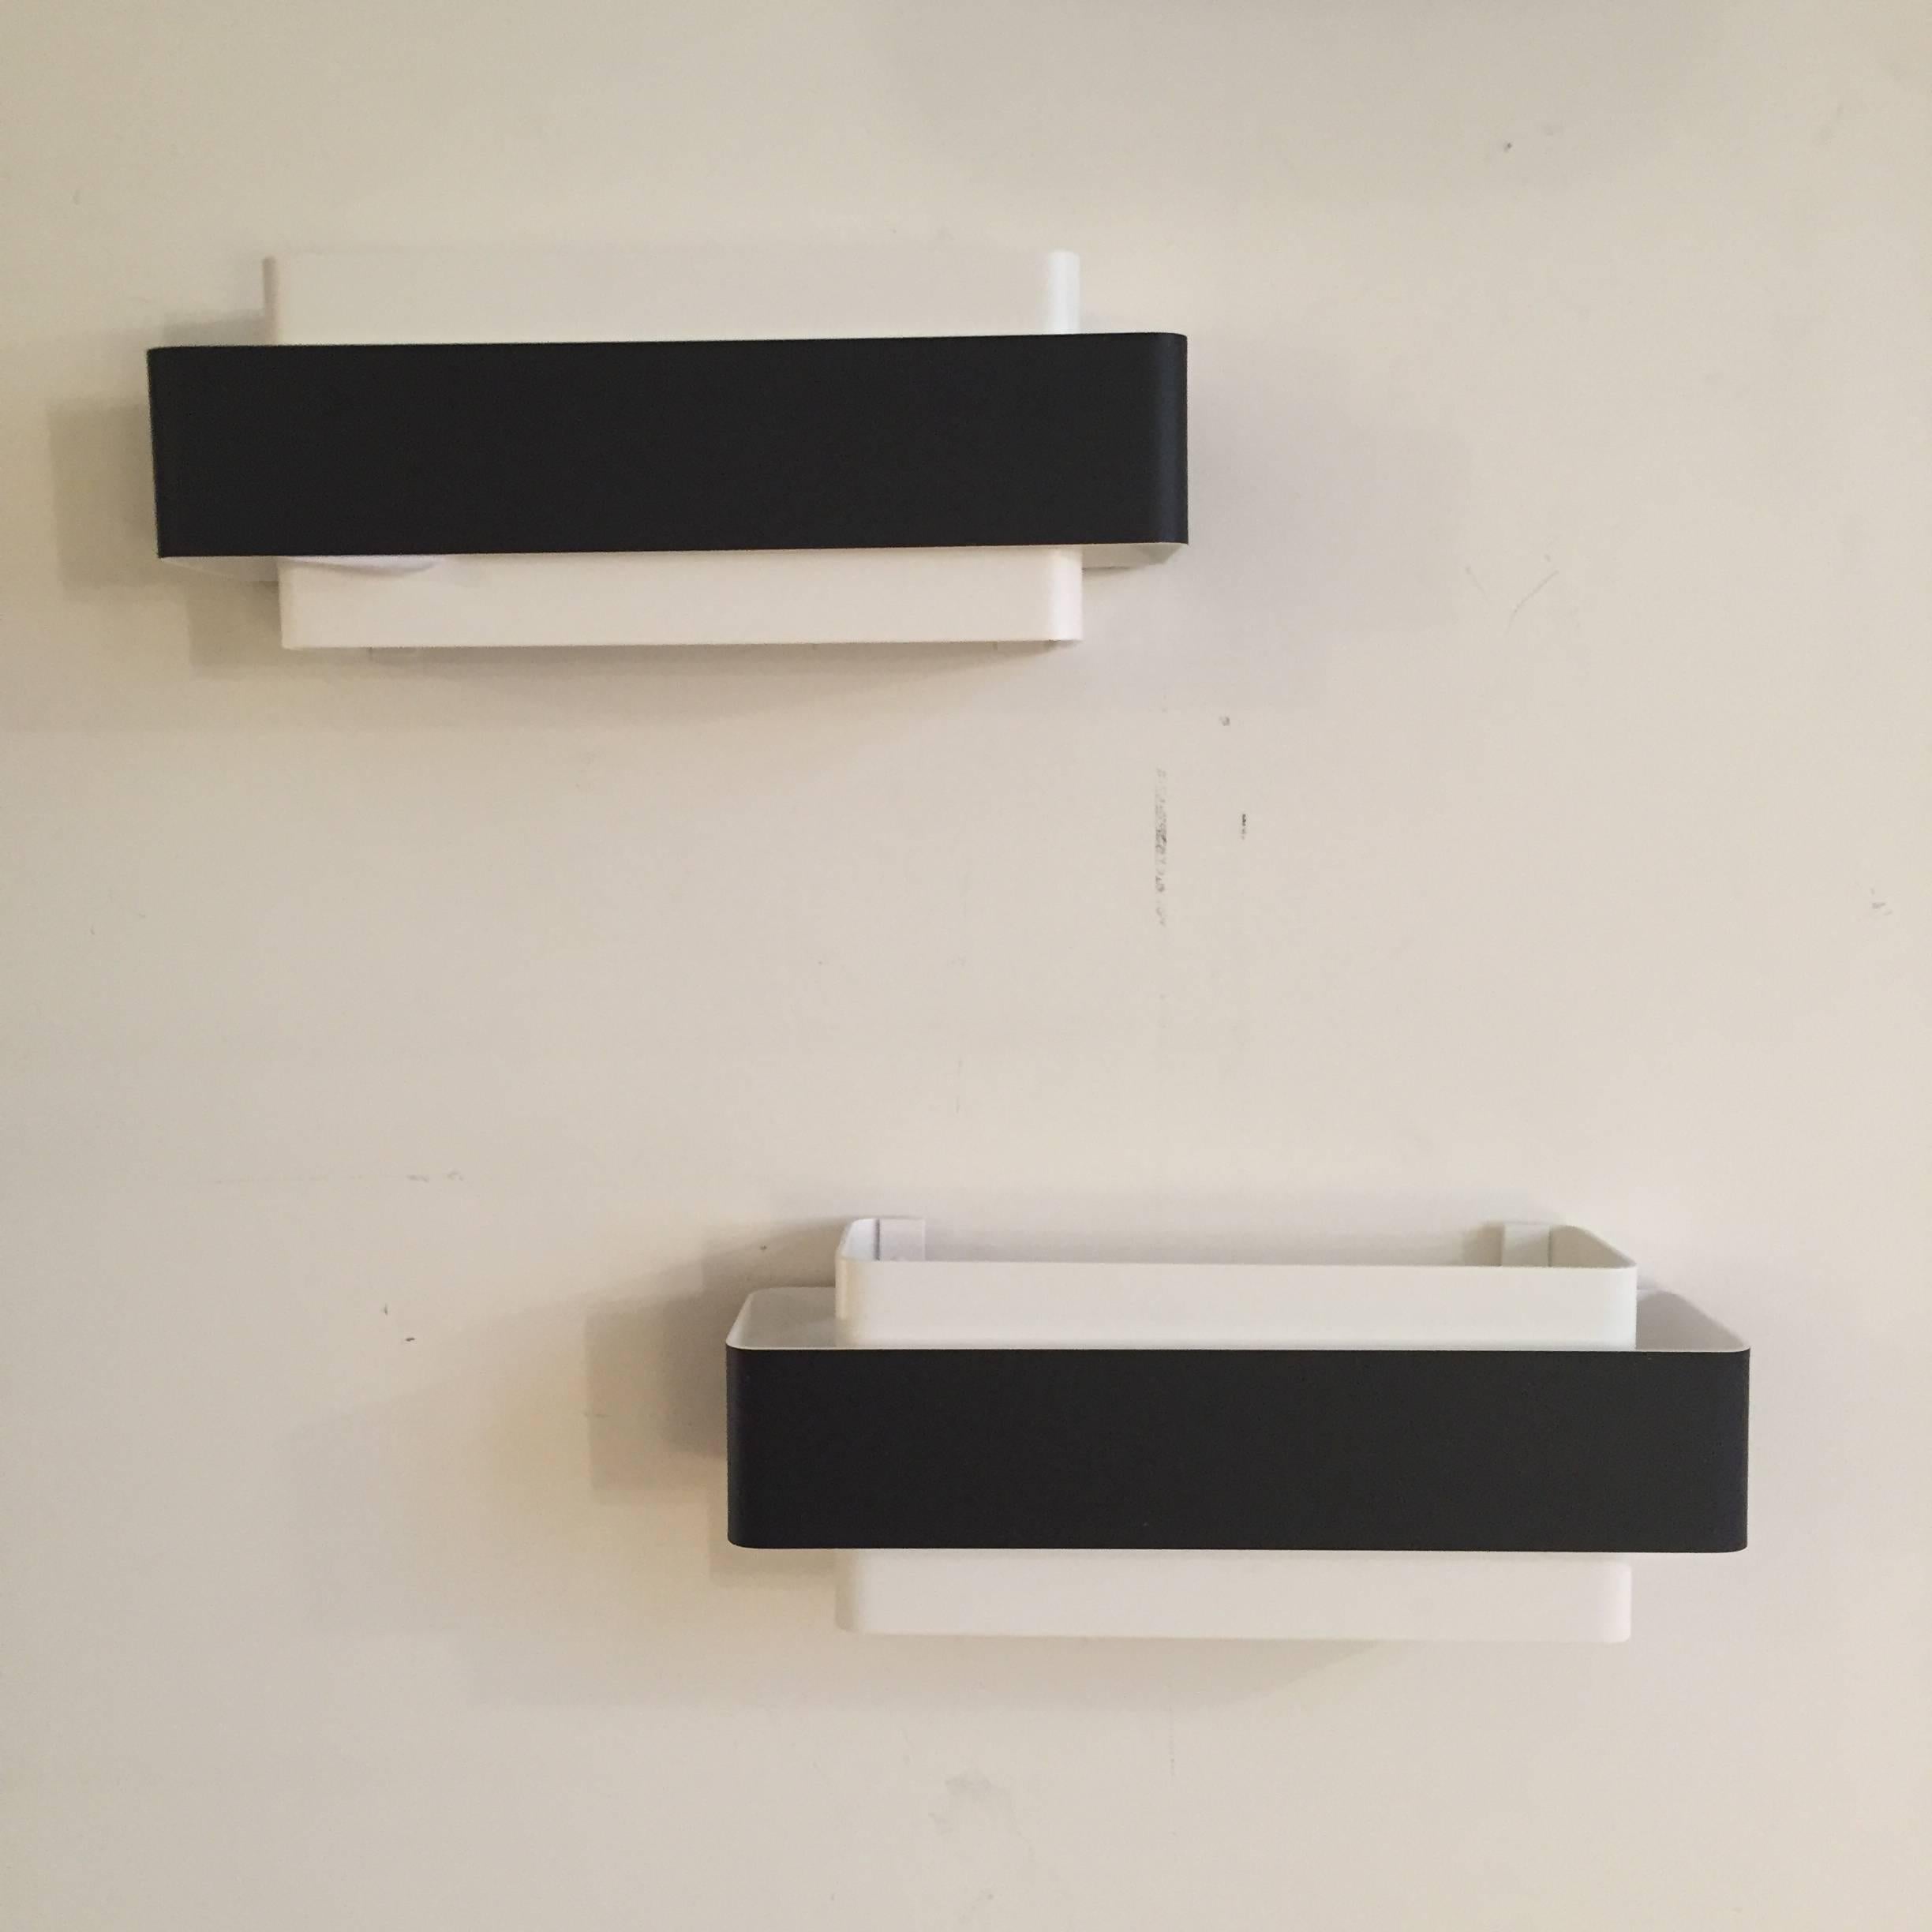 A pair of French XX Century sconces, Black and white enameled metal. Excellent condition.